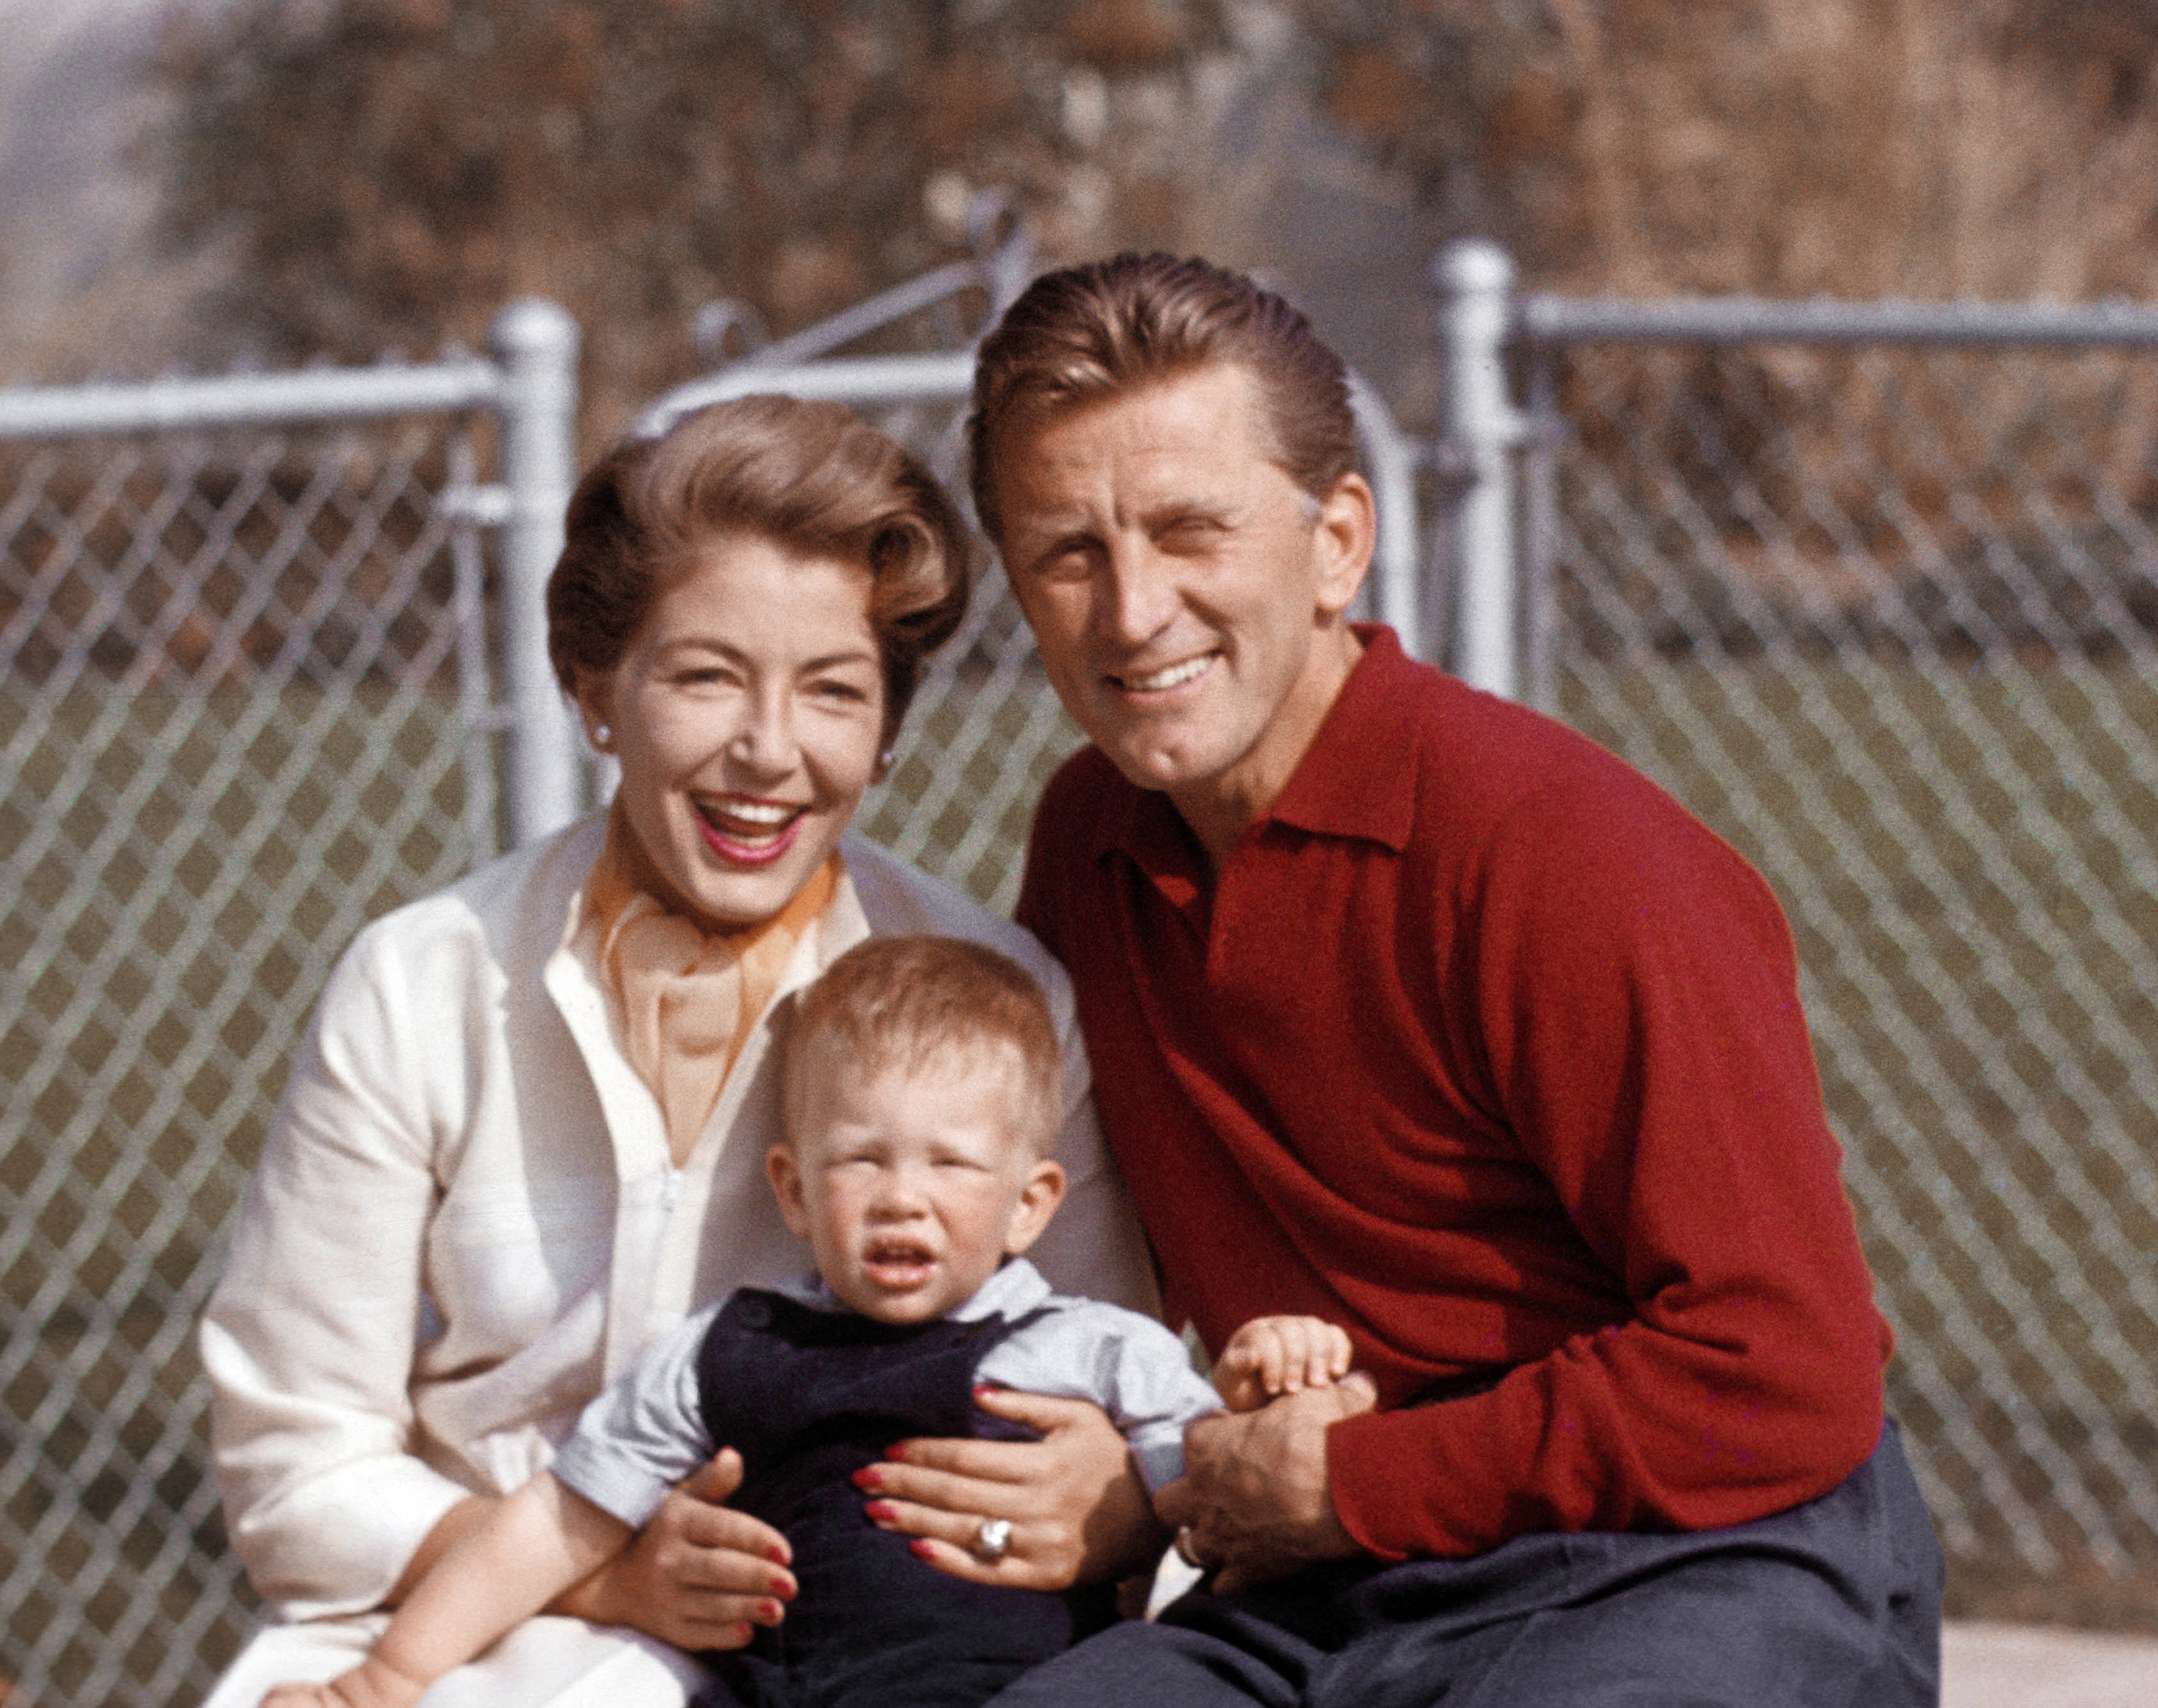 Kirk Douglas at home with his spouse Anne Douglas their son Peter Vincent Douglas in Los Angeles on February 14, 1957. | Source: Getty Images